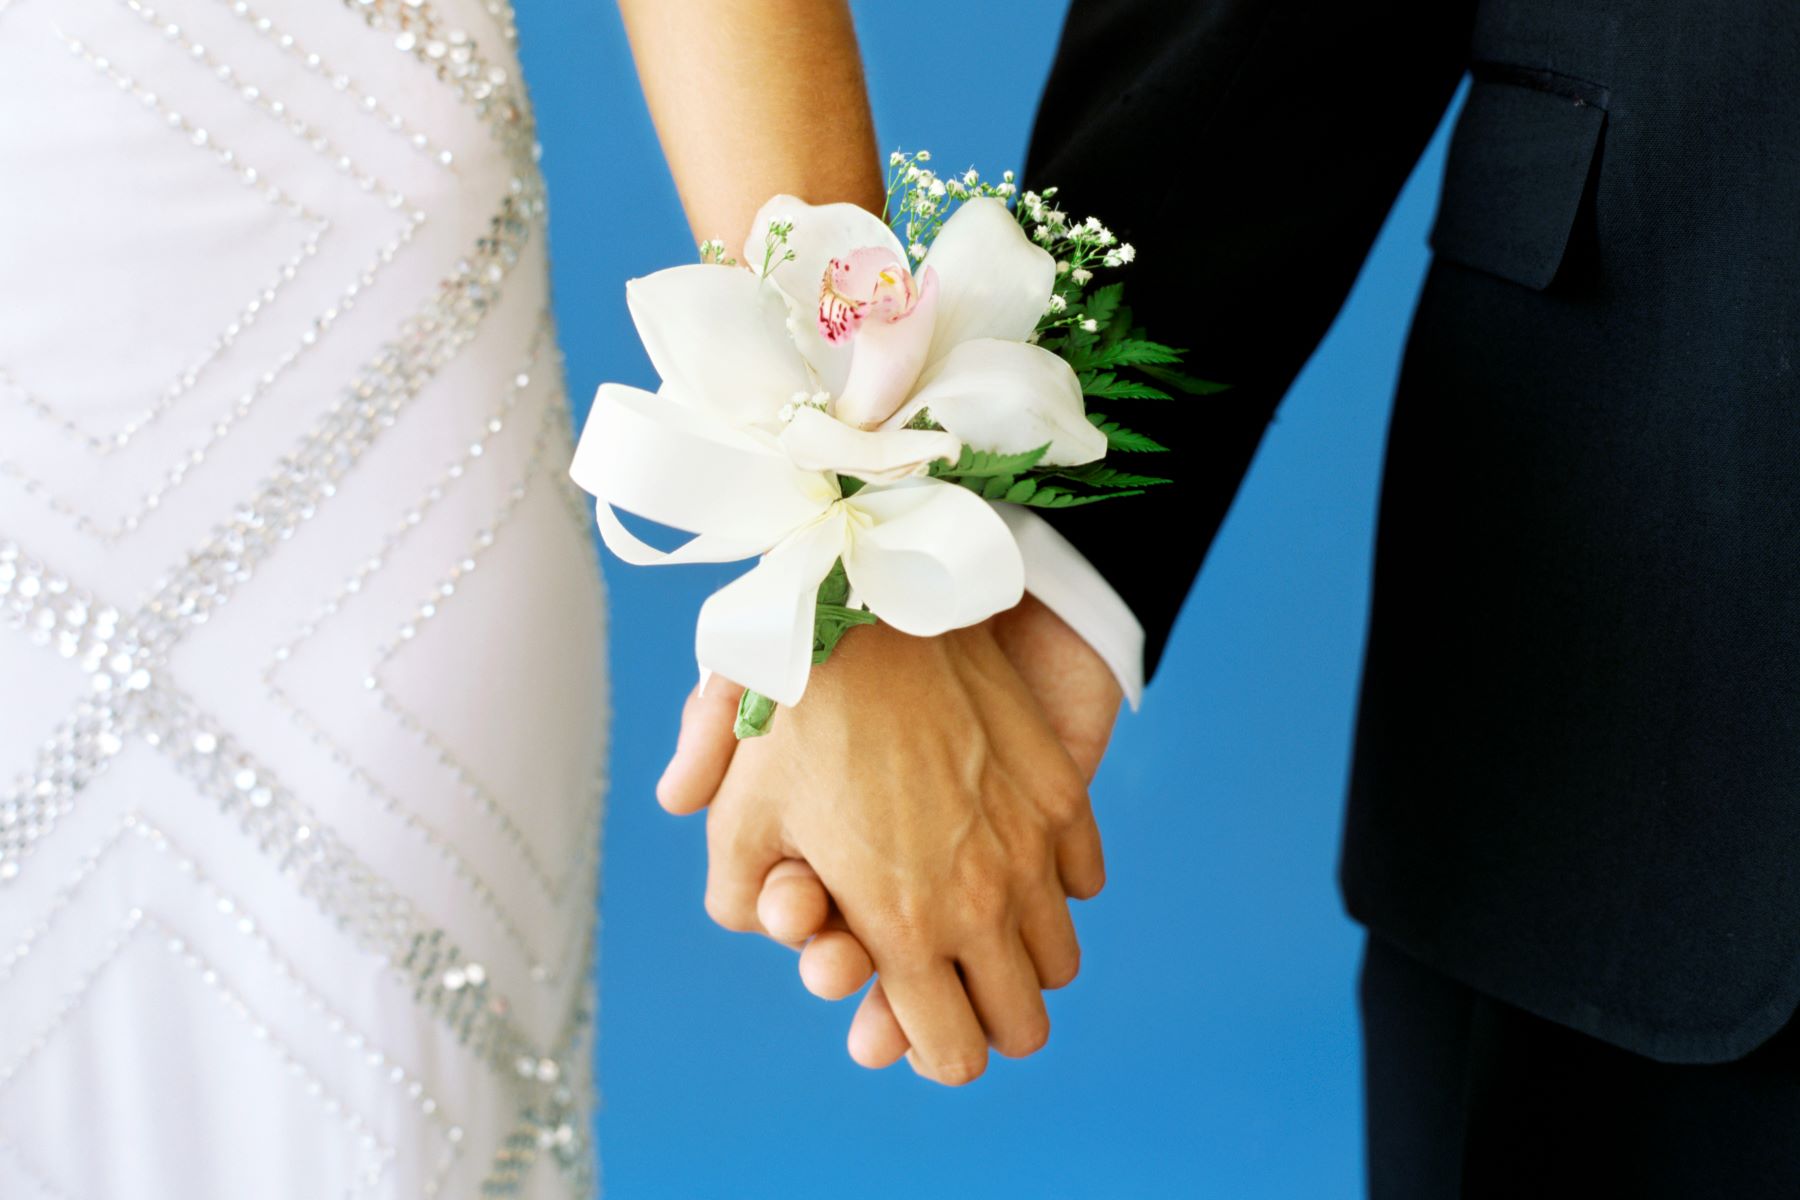 The Surprising Trend: High School Students Still Buying Corsages For Prom